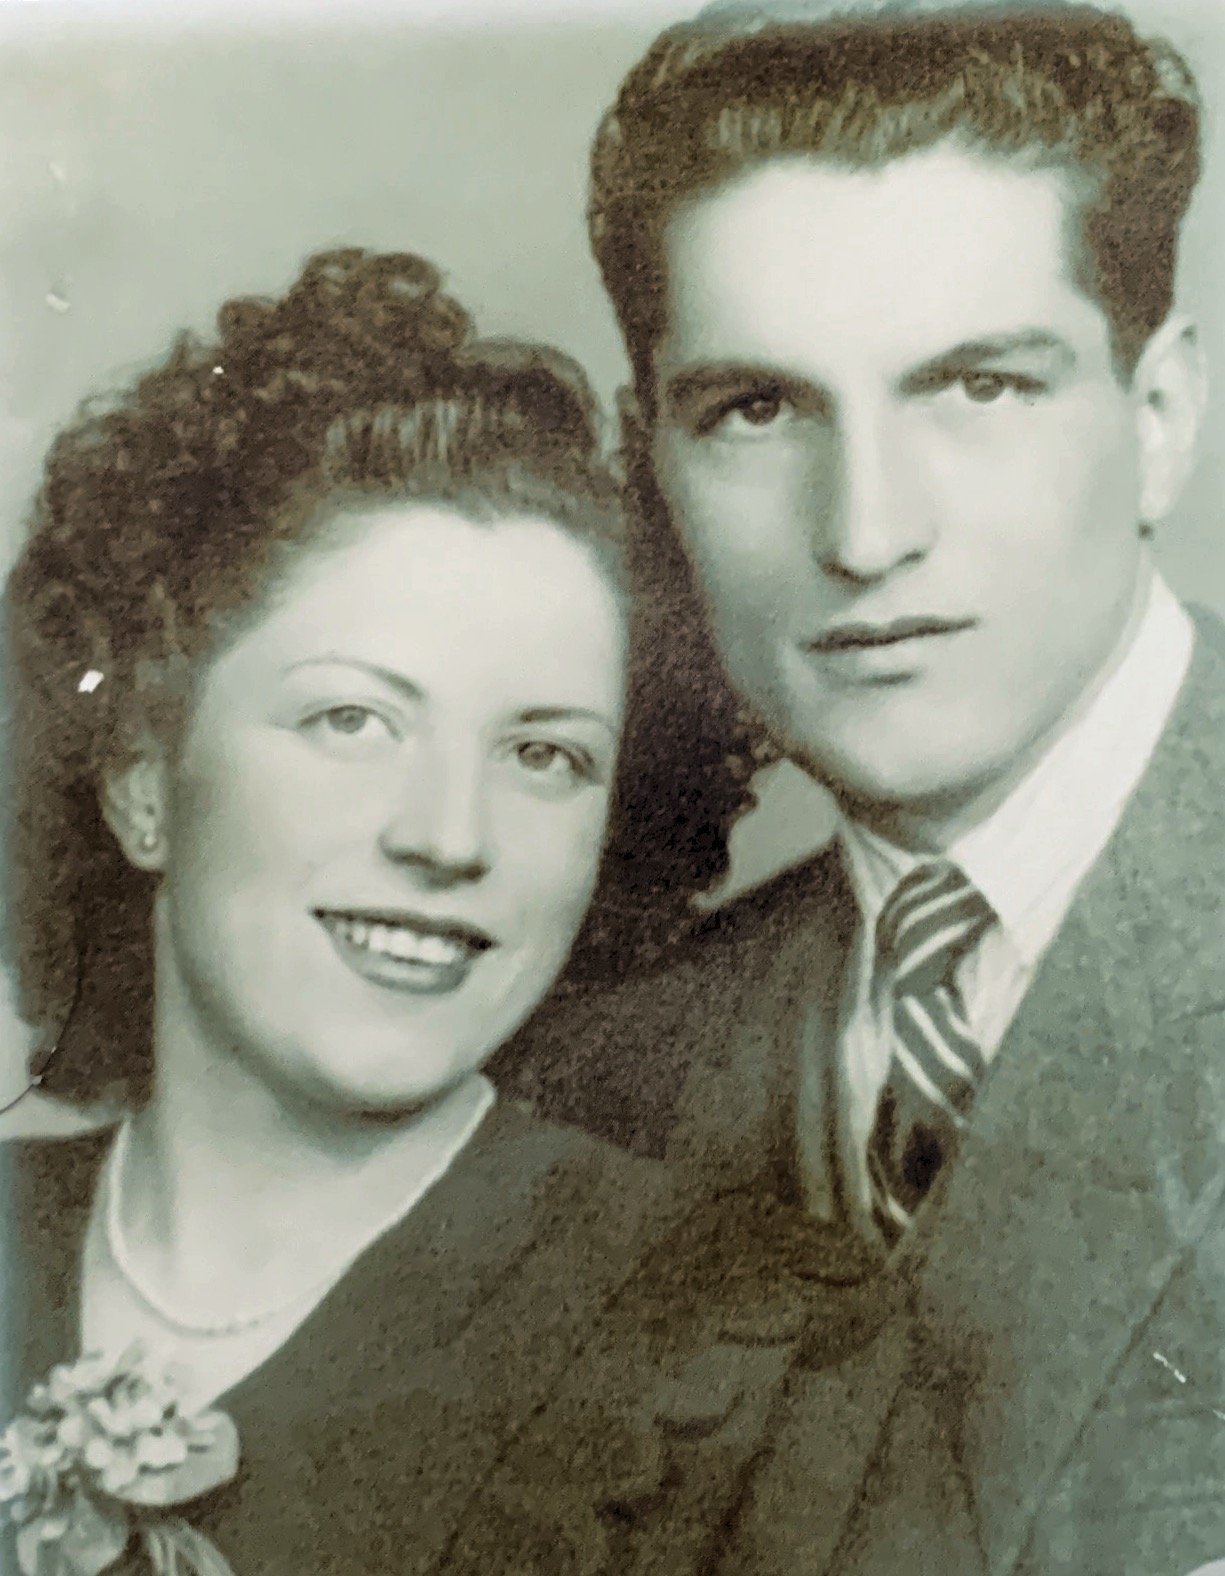 Married 17/3/1948